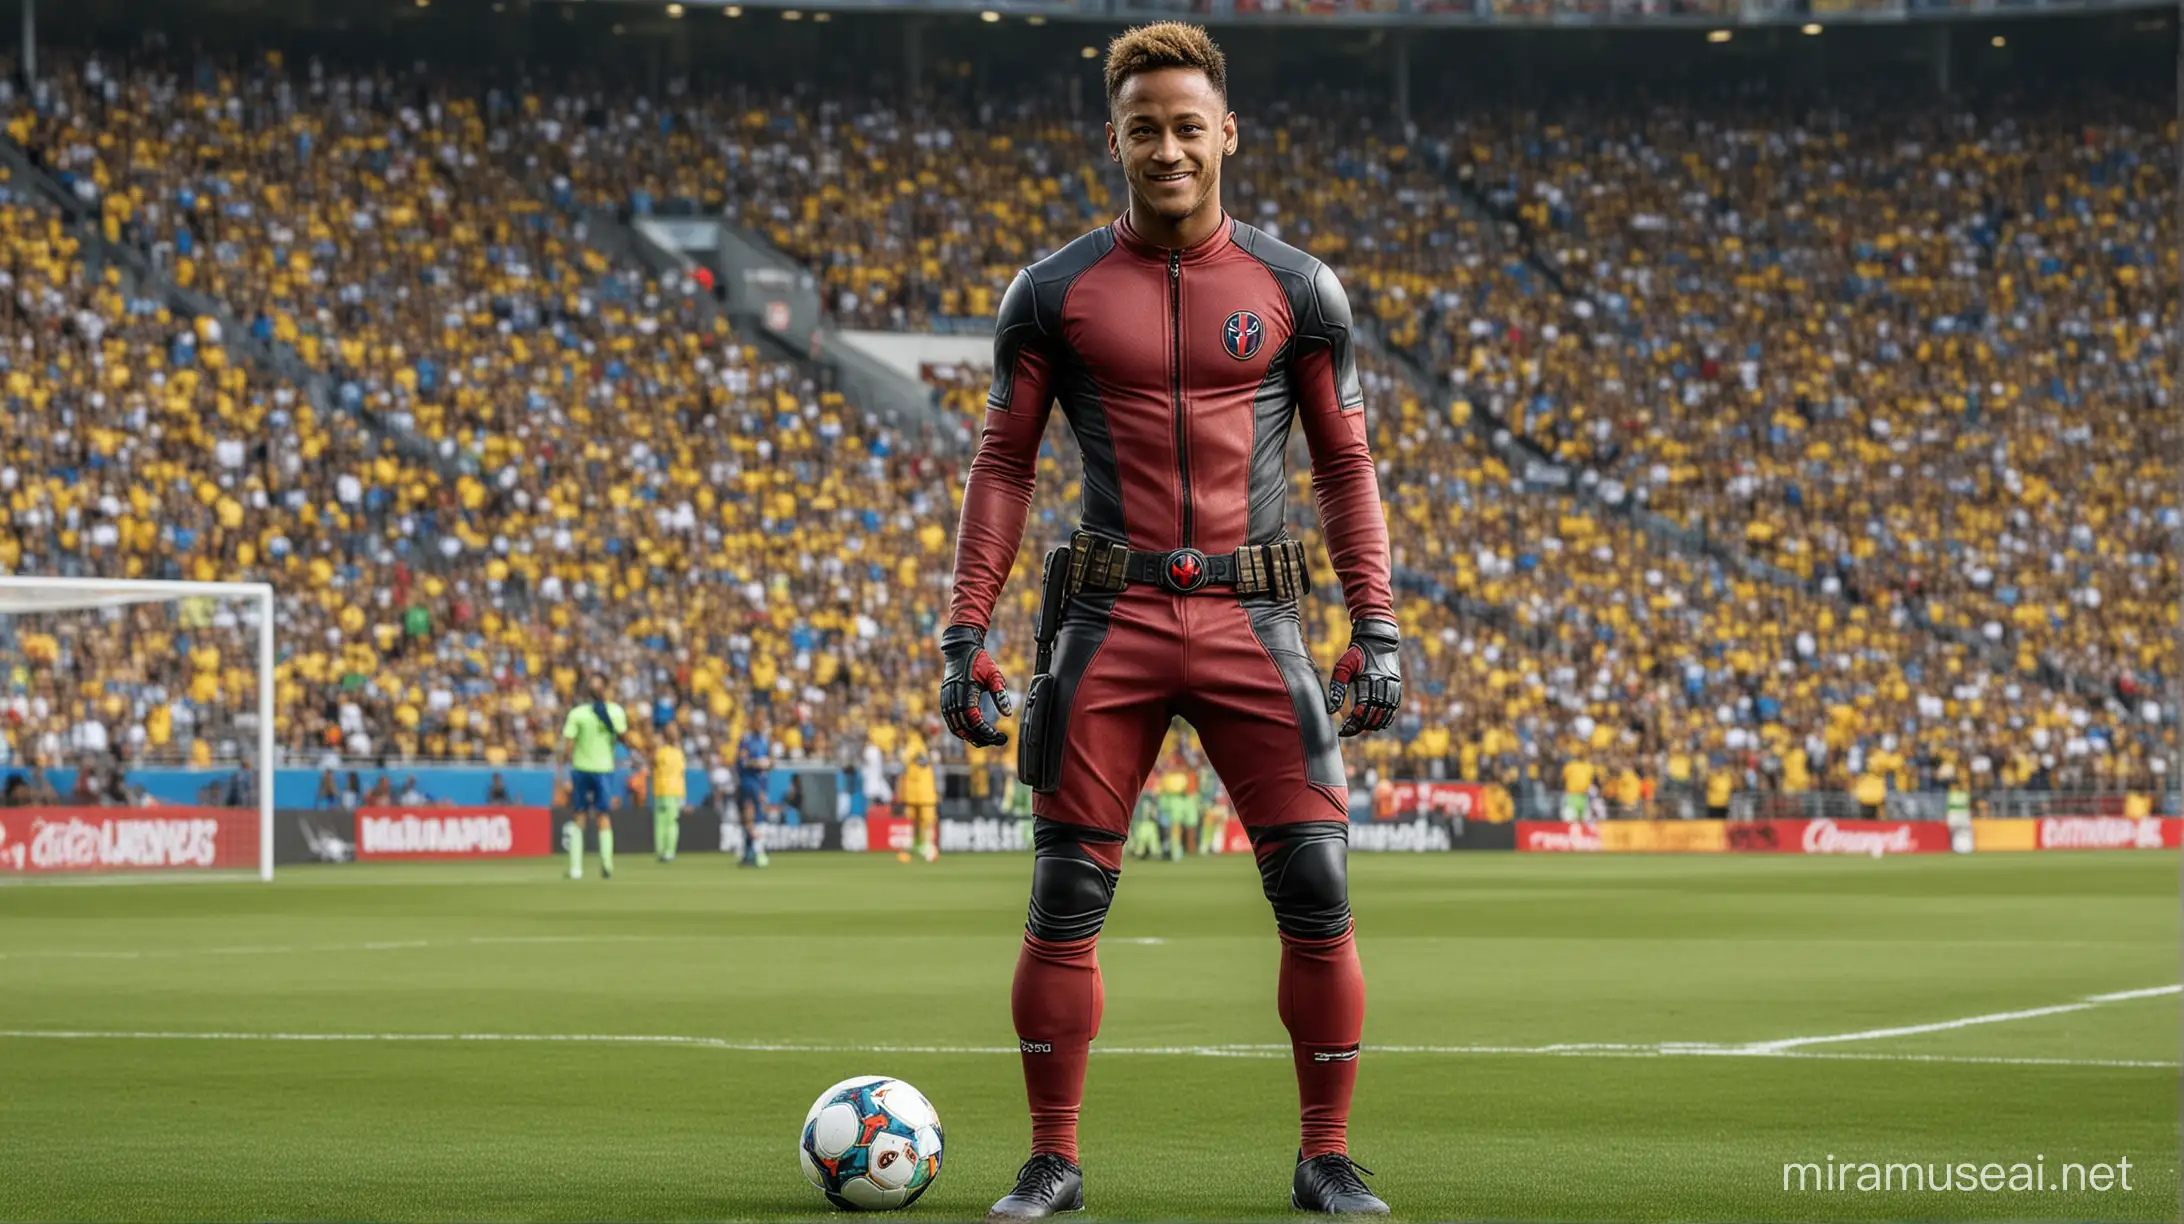 Neymar Júnior the Brazilian Soccer player transformes into the comic book superhero Deadpool, full body, looking directly at the camera, without head cover, so Smiley face, blue eyes, in the football field, he is standing with a ball next to him.